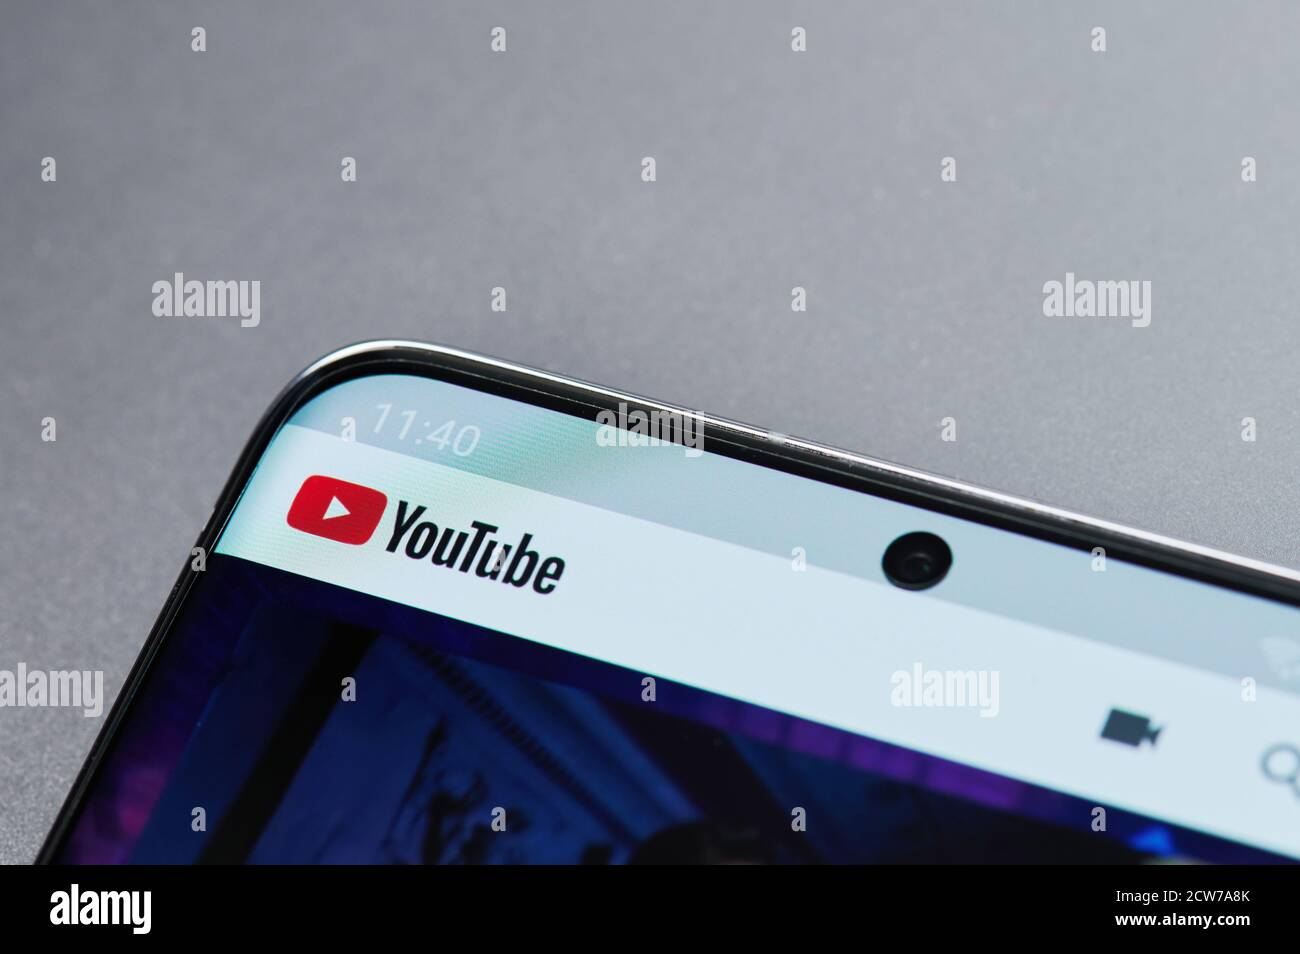 New york, USA - September 28, 2020: Menu in youtube smartphone app on screen close up view Stock Photo